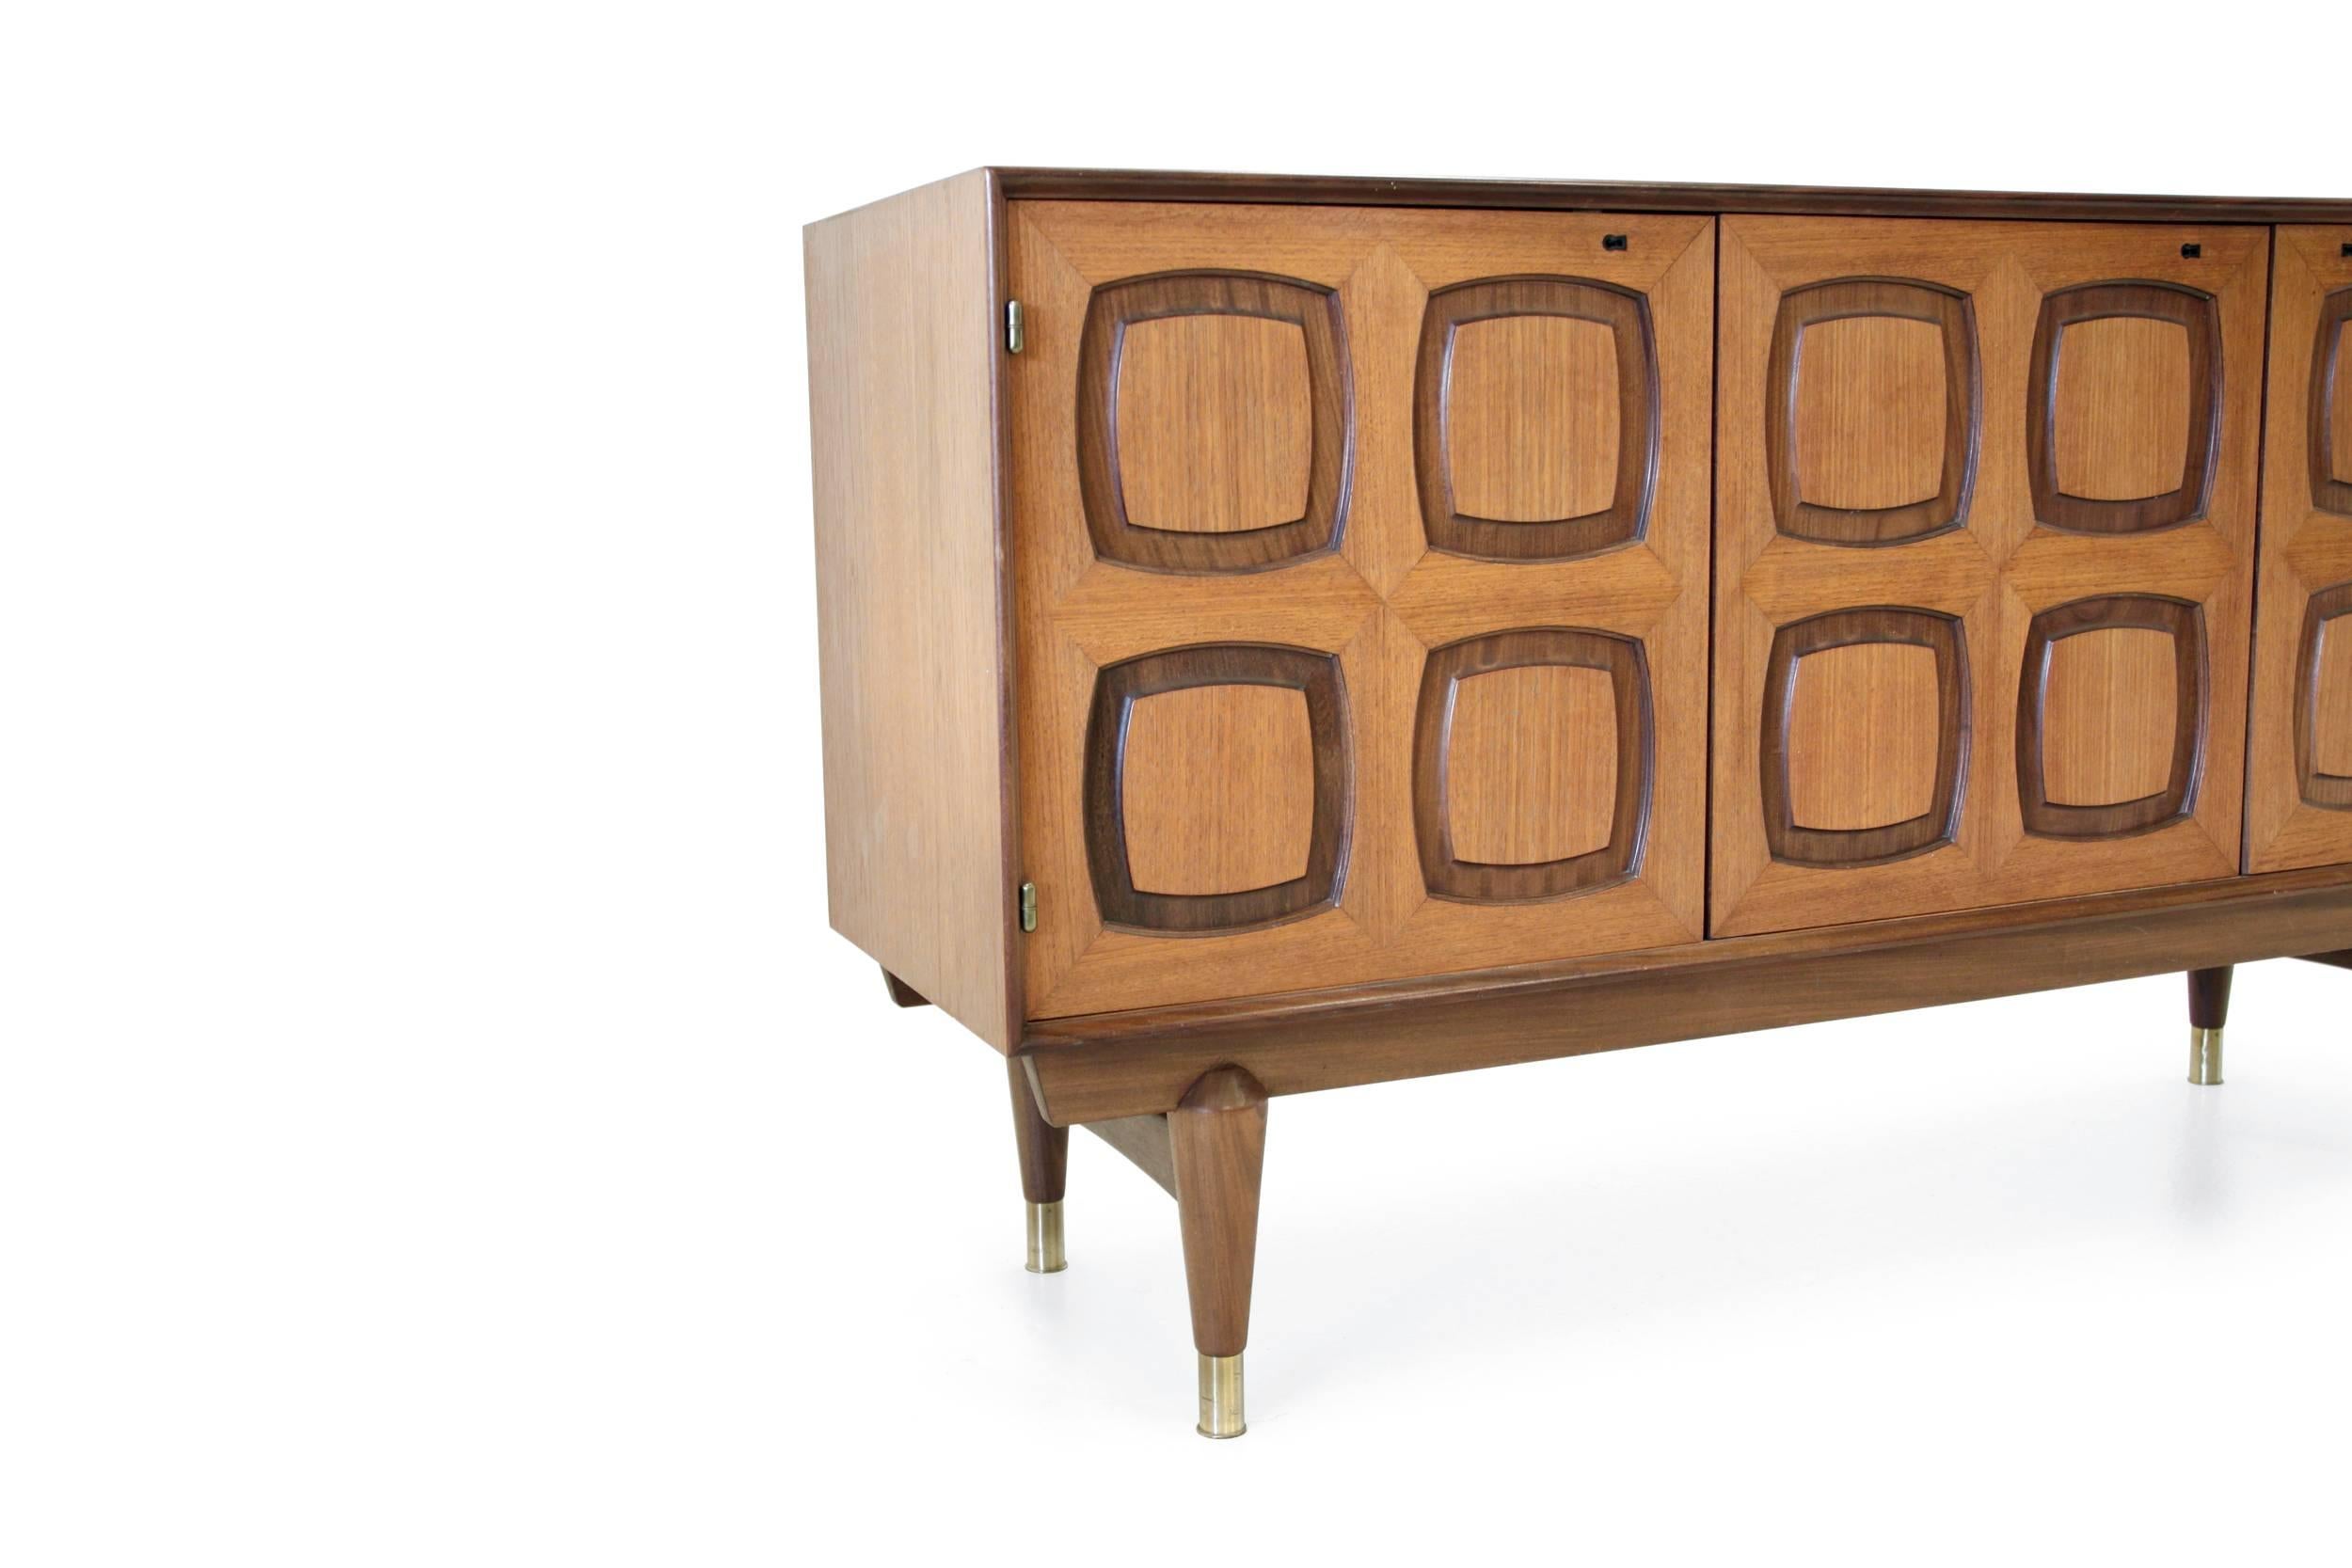 Beautiful and well made sideboard on a teak frame, brass detailing and four drawers.

Model 'Flor'. Designed by Rastad & Relling the leading mid century design studio in norway in the 50'60s. Made by Gustav Bahus Eftf.

In excellent vintage